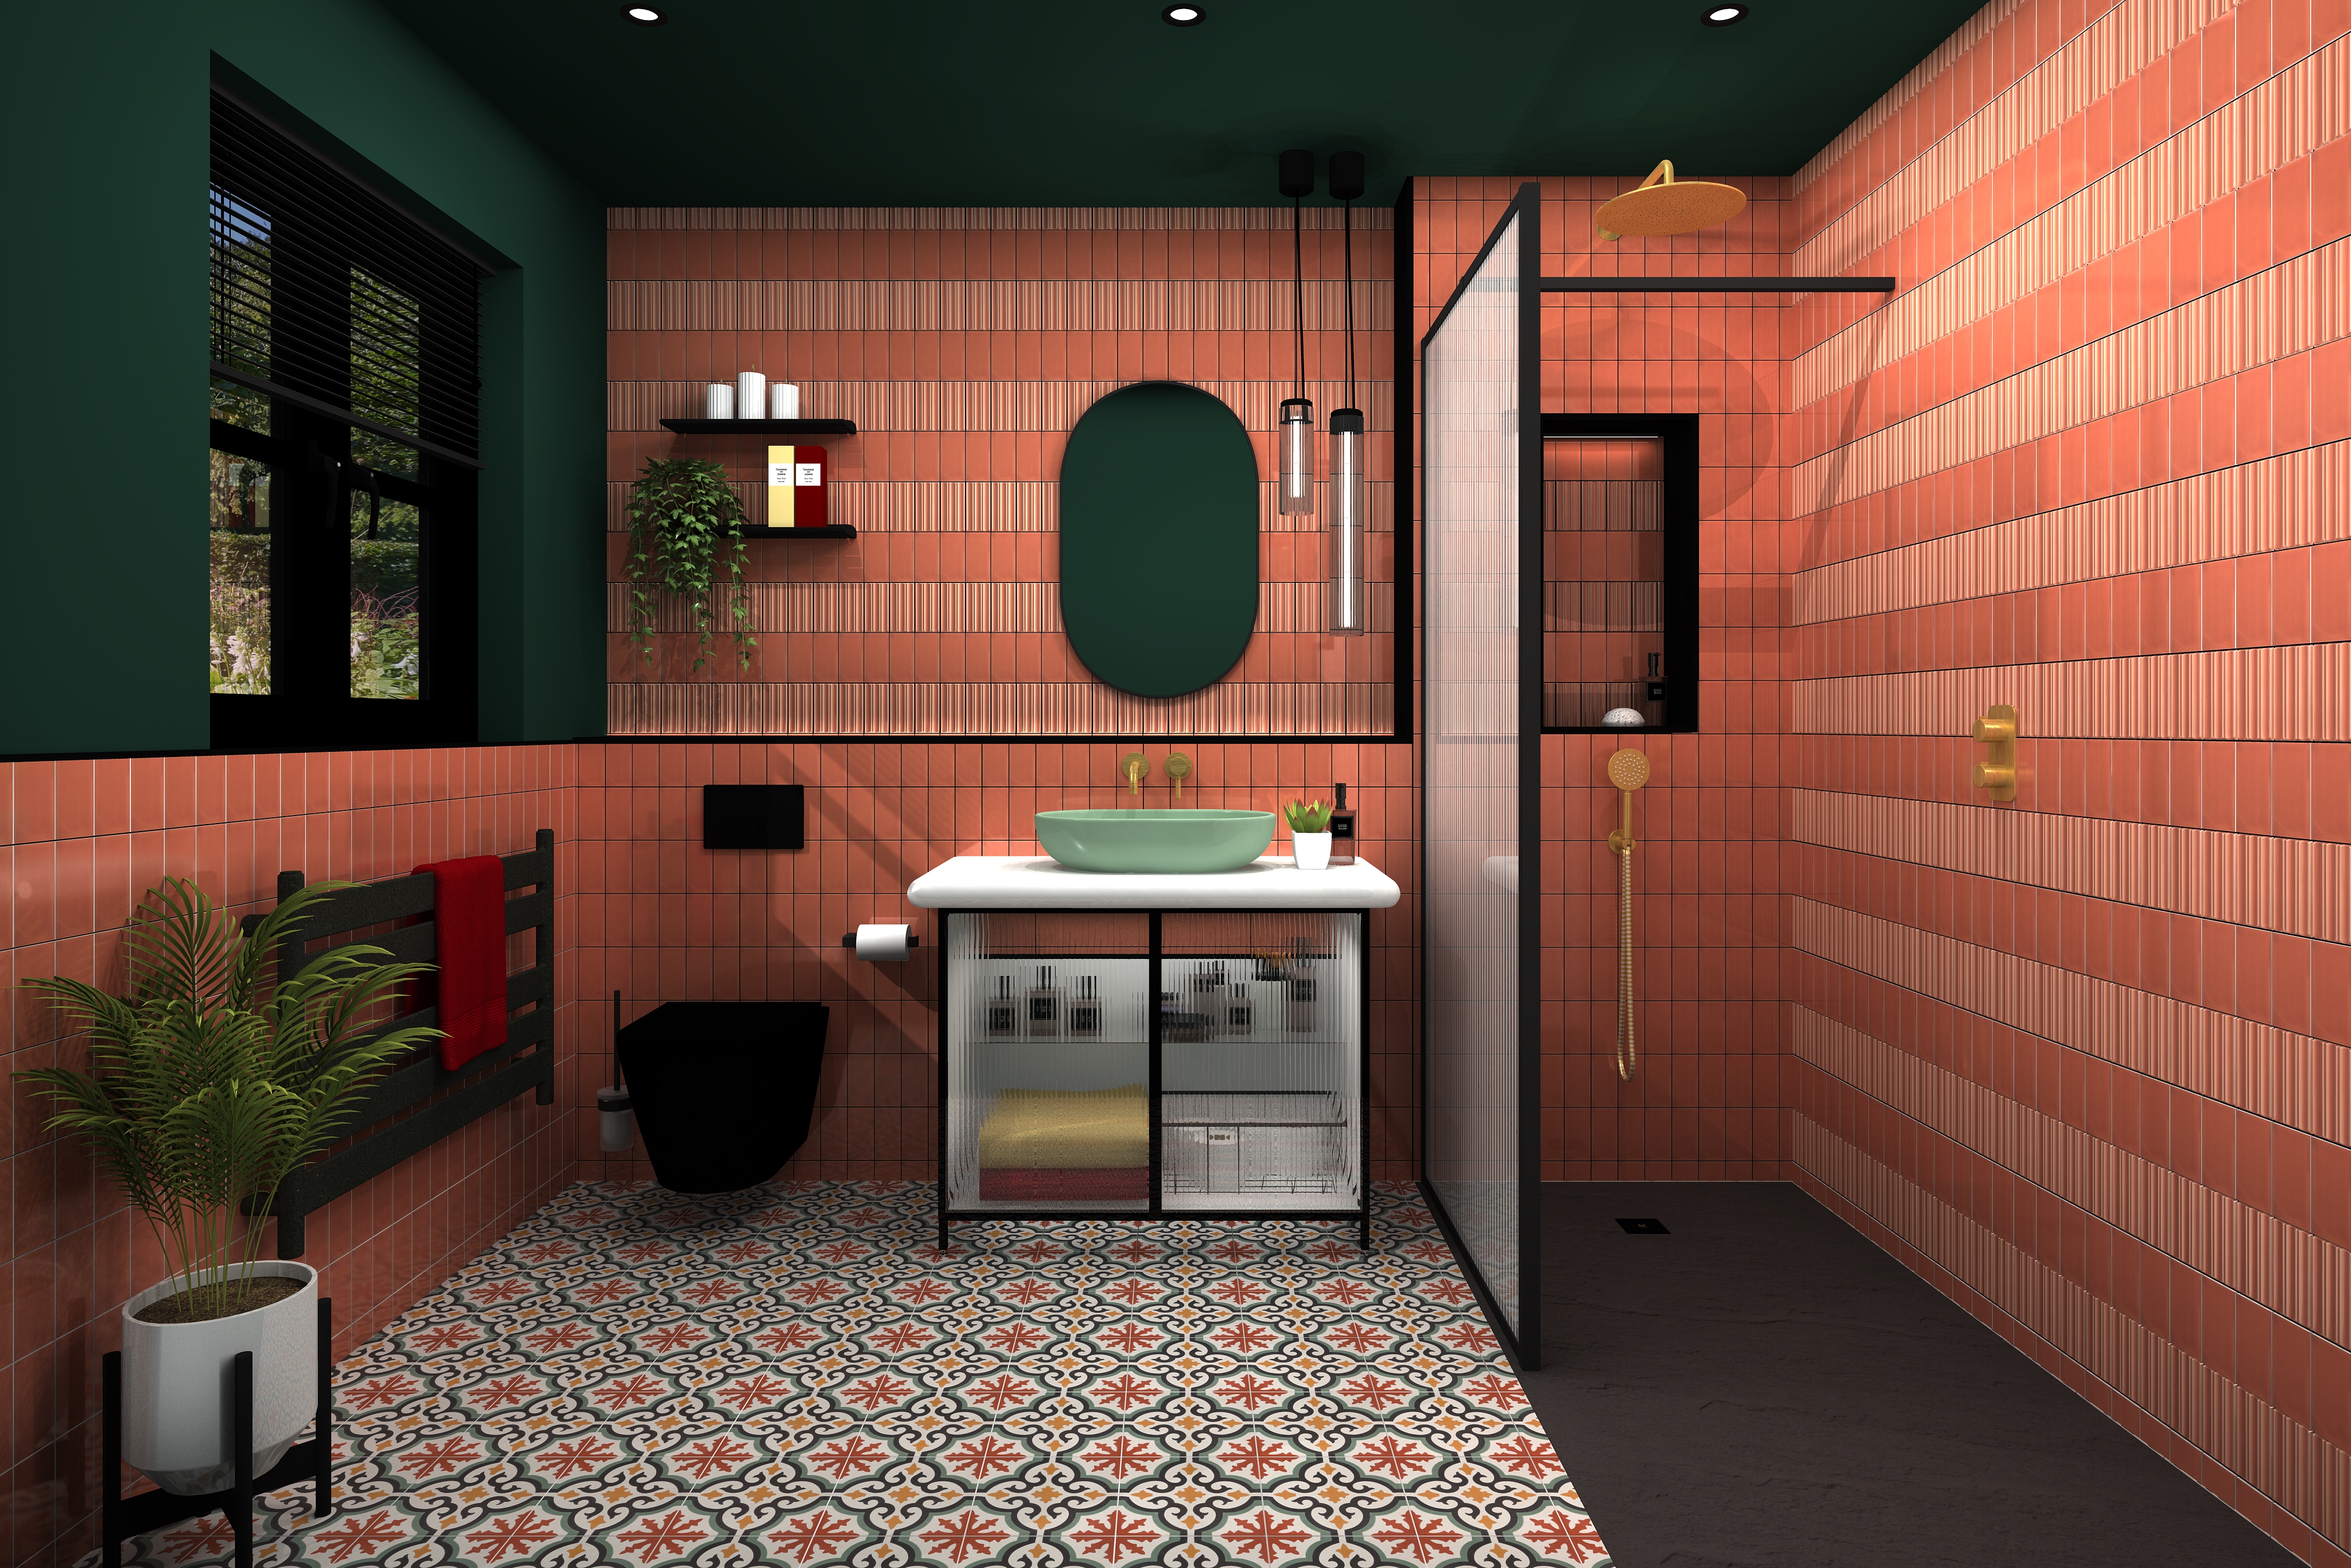 image of a 3D CGI virtualworlds bathroom design of red tiled bathroom with black shower and washstand, and accessories with moroccan tiled patterned floor 